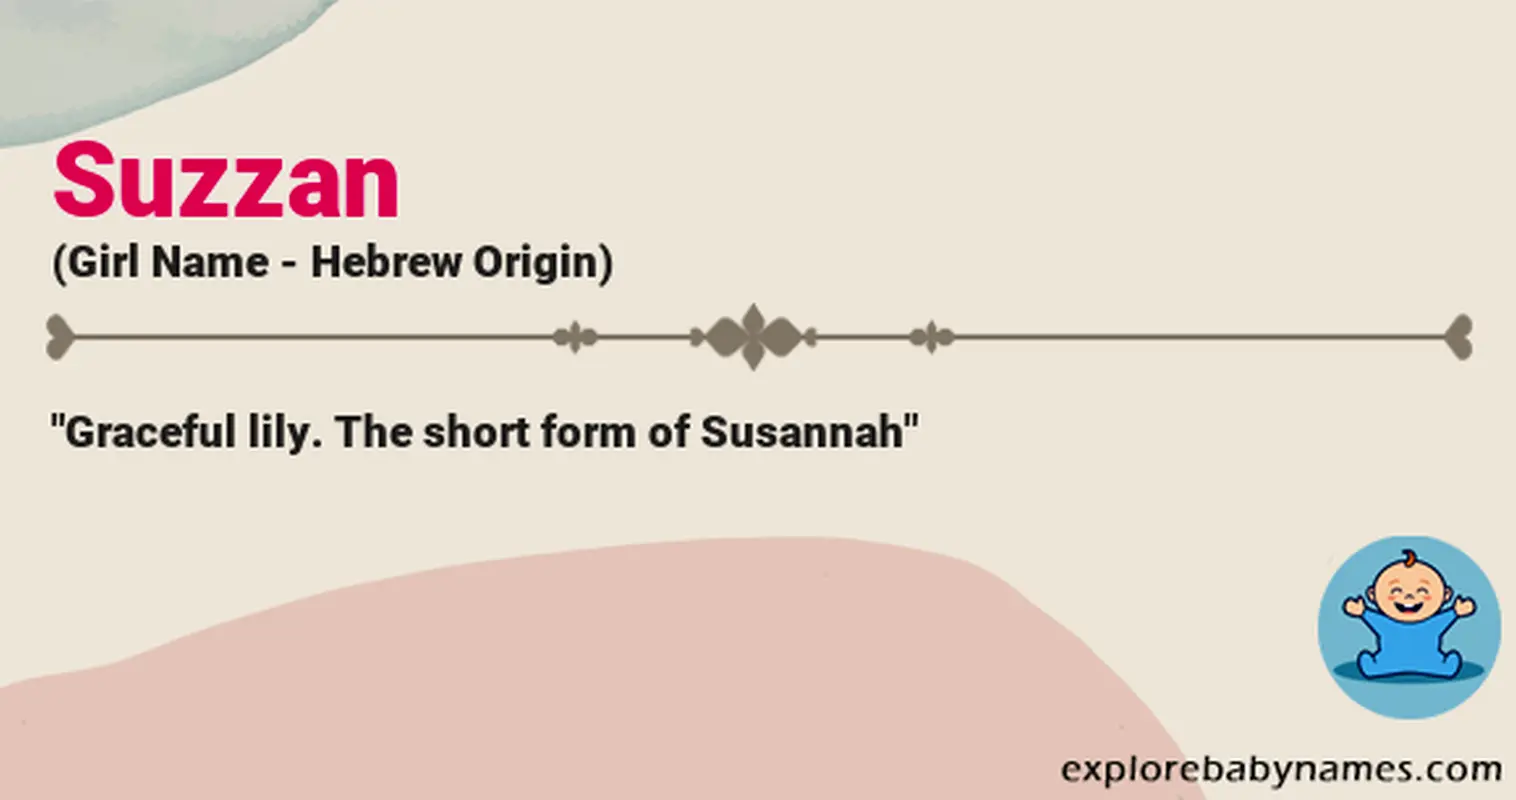 Meaning of Suzzan